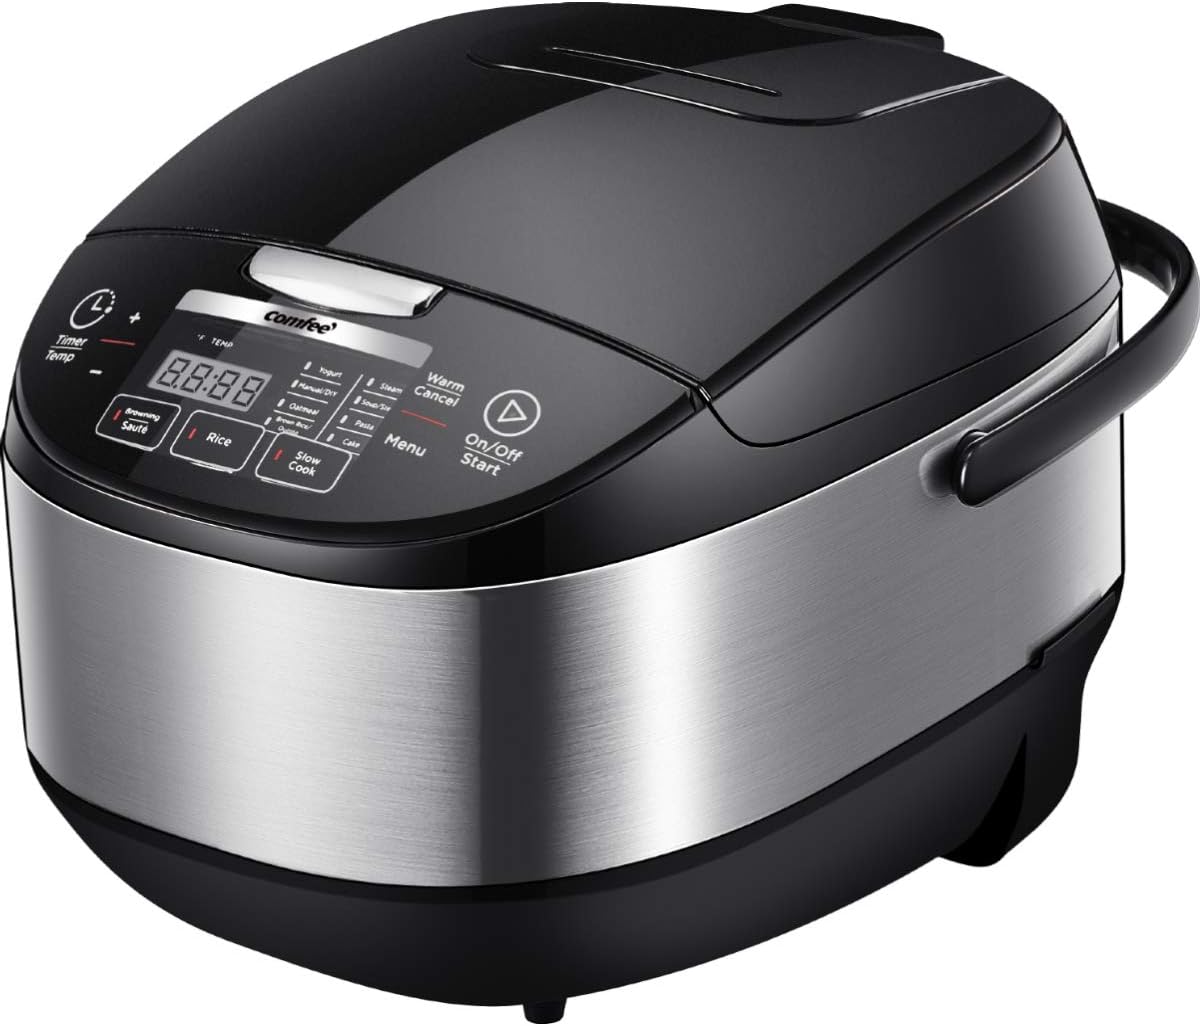 https://bigbigmart.com/wp-content/uploads/2023/08/COMFEE-Rice-Cooker-Asian-Style-Large-Rice-Cooker-with-Fuzzy-Logic-Technology-11-Presets-10-Cup-Uncooked-20-Cup-Cooked-Auto-Keep-Warm-24-Hr-Delay-Timer.jpg